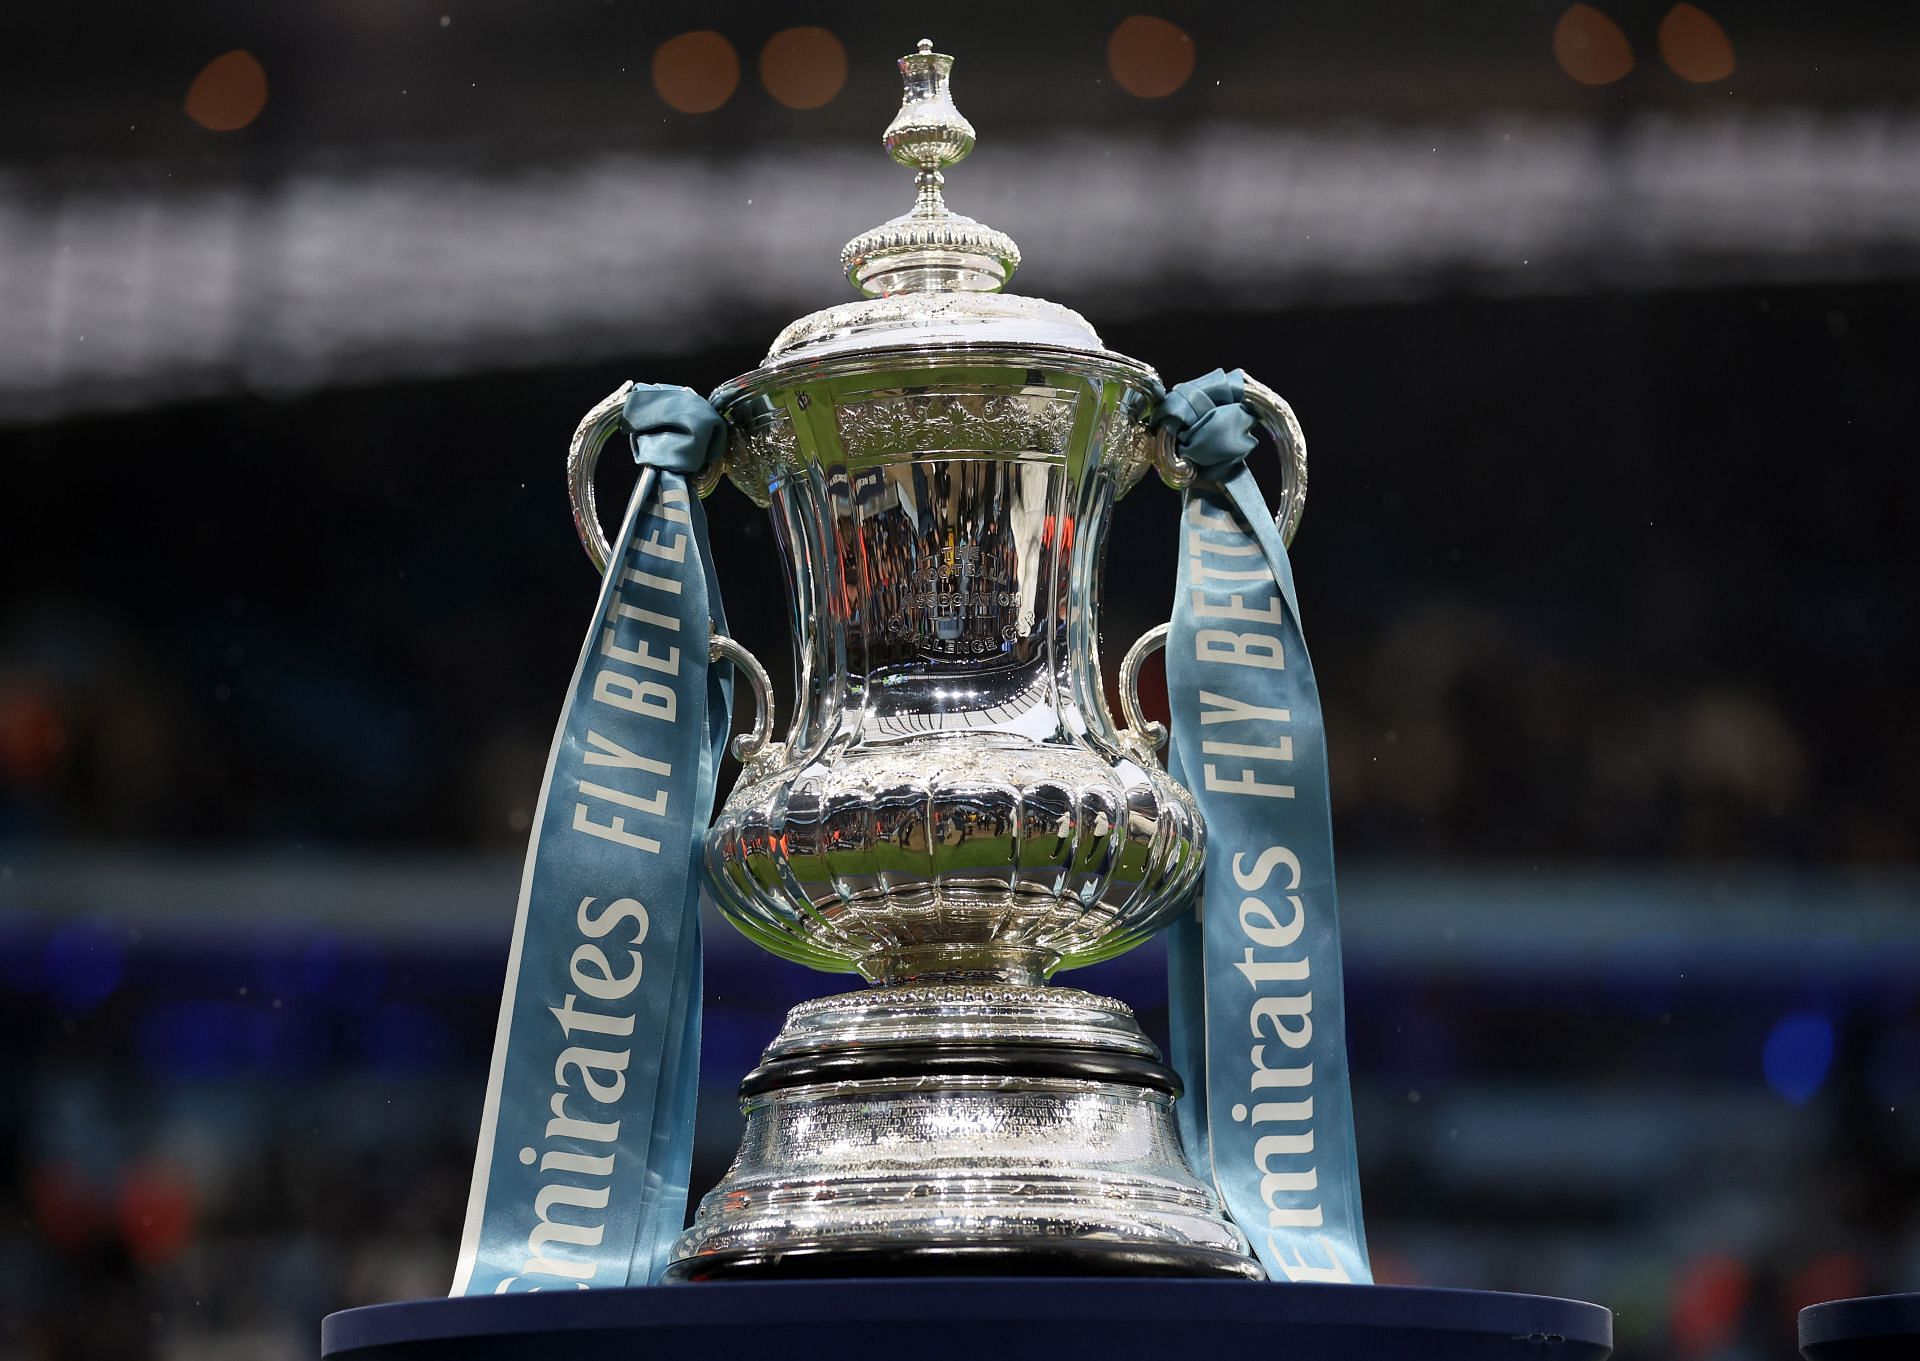 Manchester City will be eyeing their eighth FA Cup title